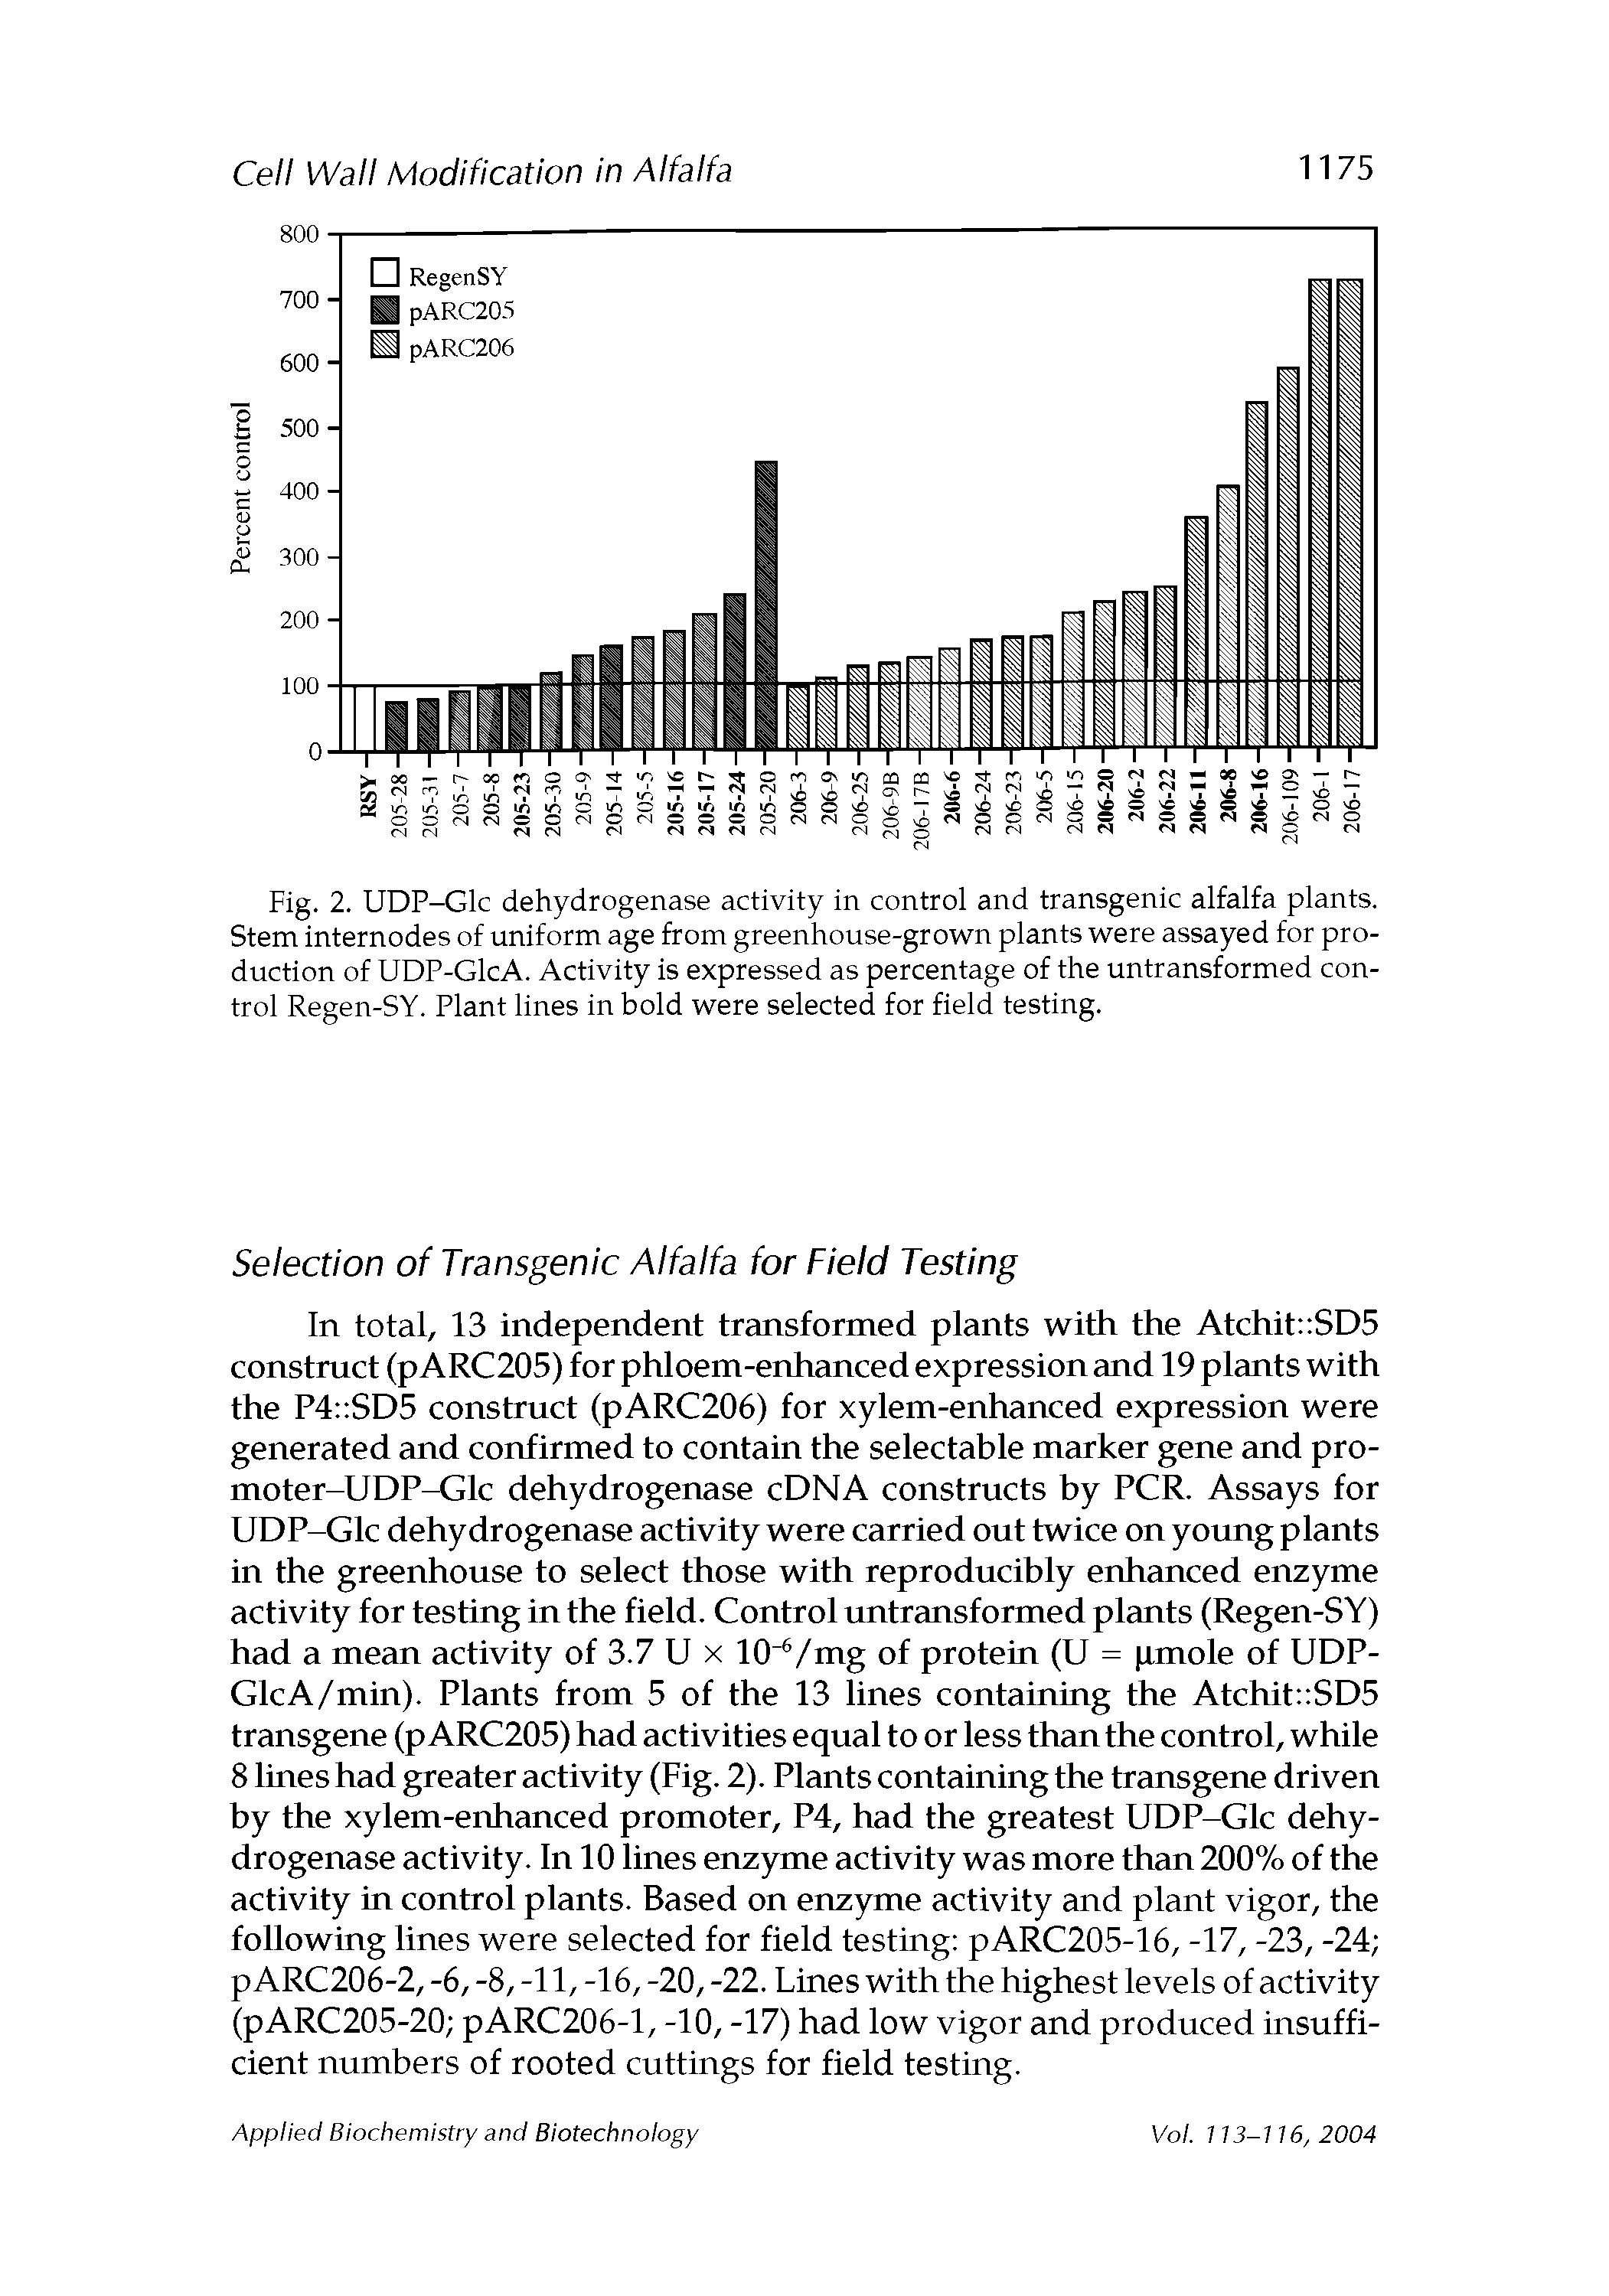 Fig. 2. UDP-Glc dehydrogenase activity in control and transgenic alfalfa plants. Stem internodes of uniform age from greenhouse-grown plants were assayed for production of UDP-GlcA. Activity is expressed as percentage of the untransformed control Regen-SY. Plant lines in bold were selected for field testing.